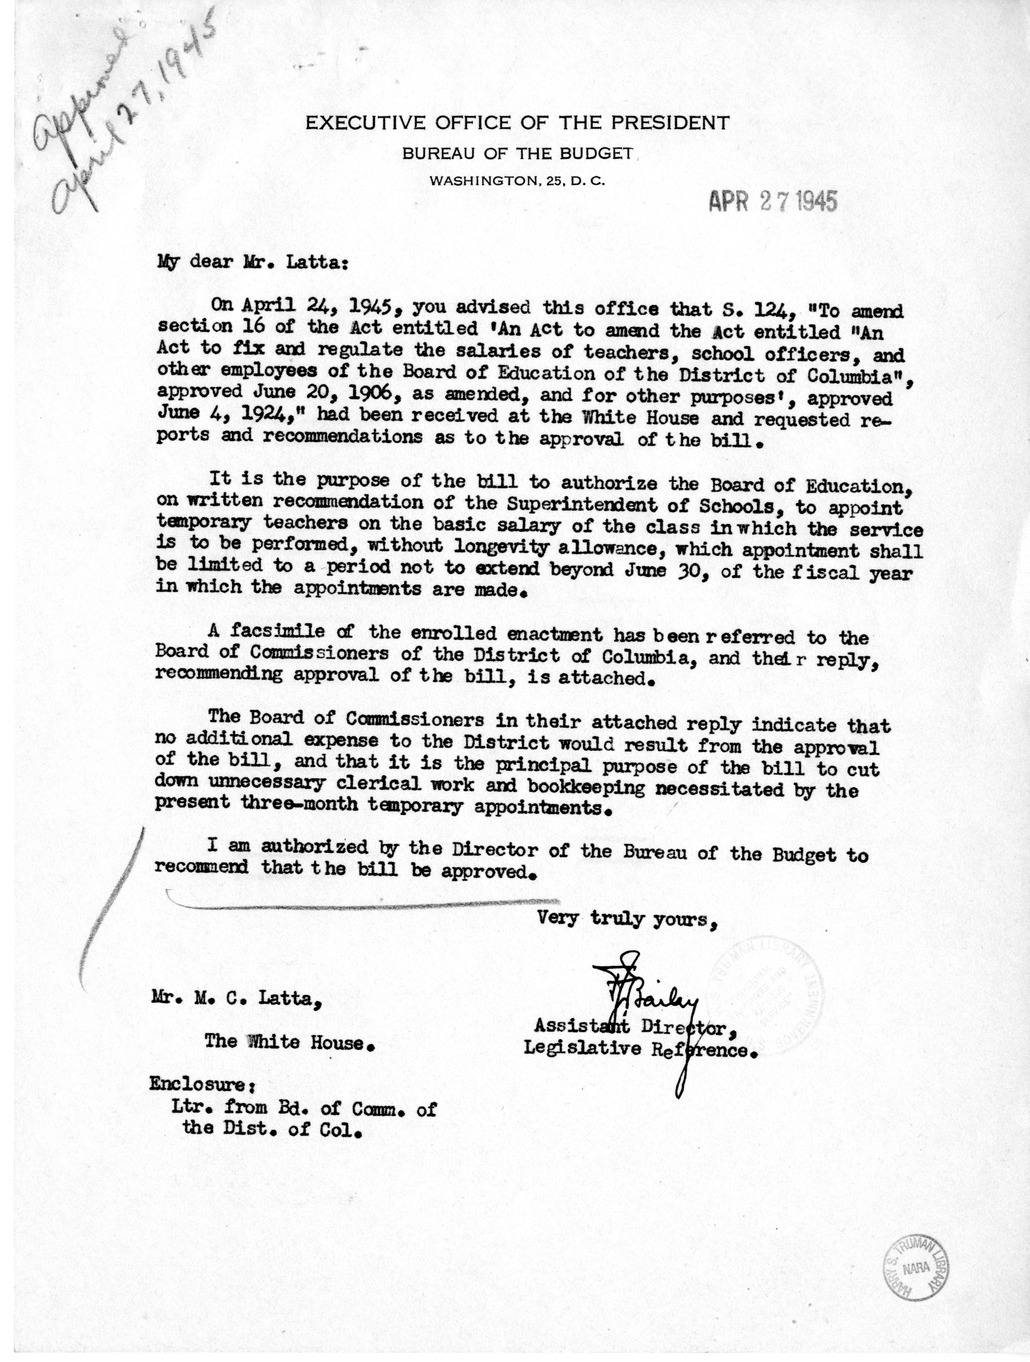 Memorandum from Frederick J. Bailey to M. C. Latta, S. 124, To Amend the Act Entitled An Act to Fix and Regulate the Salaries of Teachers, School Officers, and Other Employees of the Board of Education of the District of Columbia, with Attachments